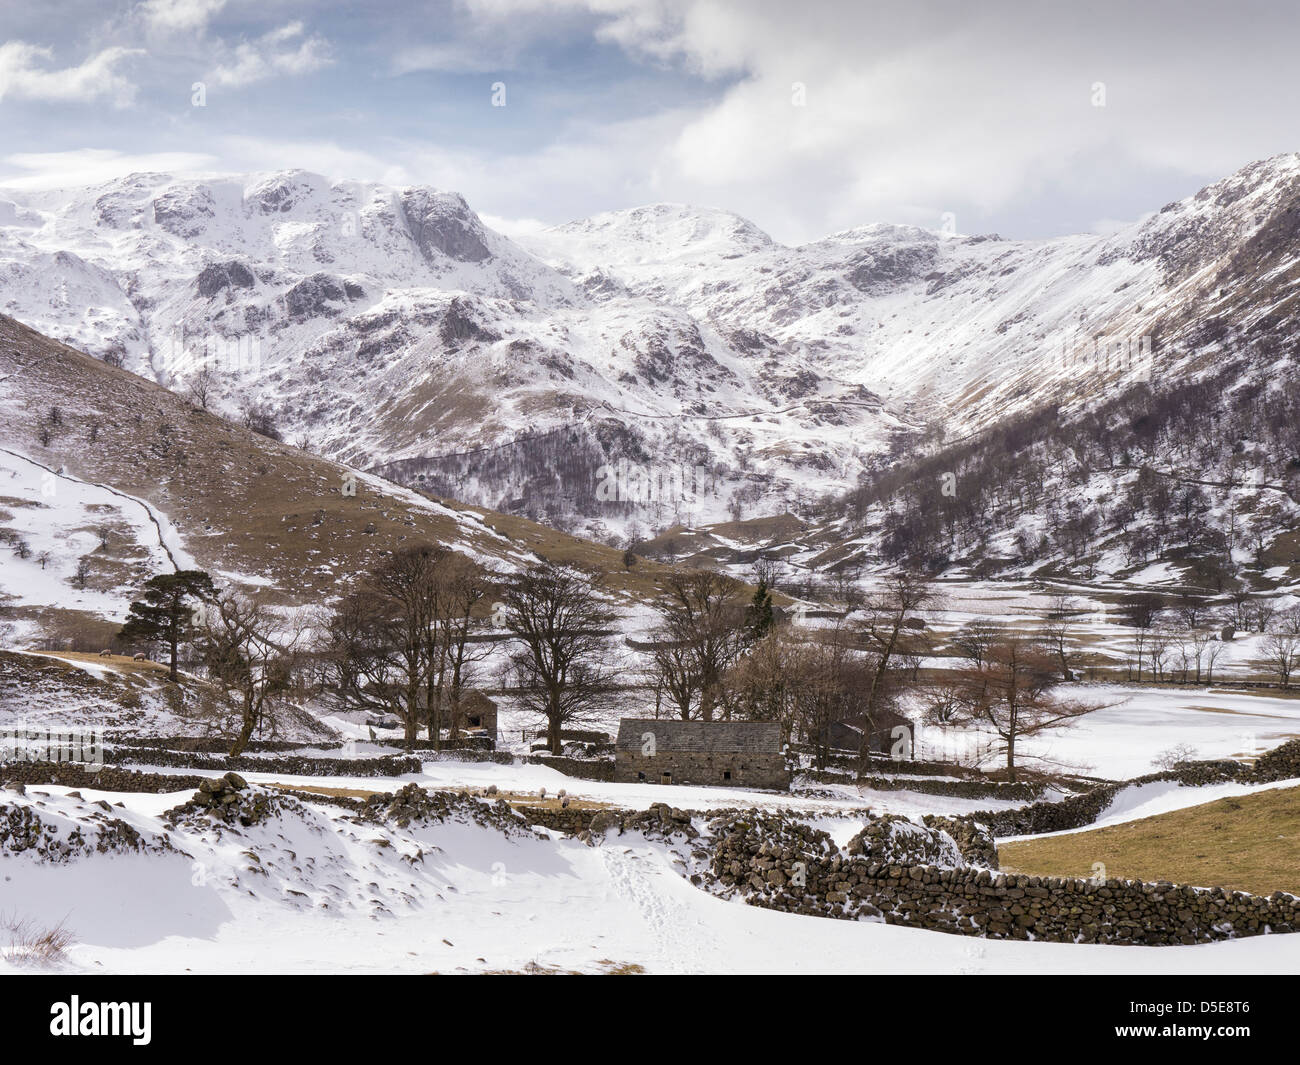 A snowy view of Dovedale and the mountains of the English Lake District in Cumbria in the North West of England Stock Photo